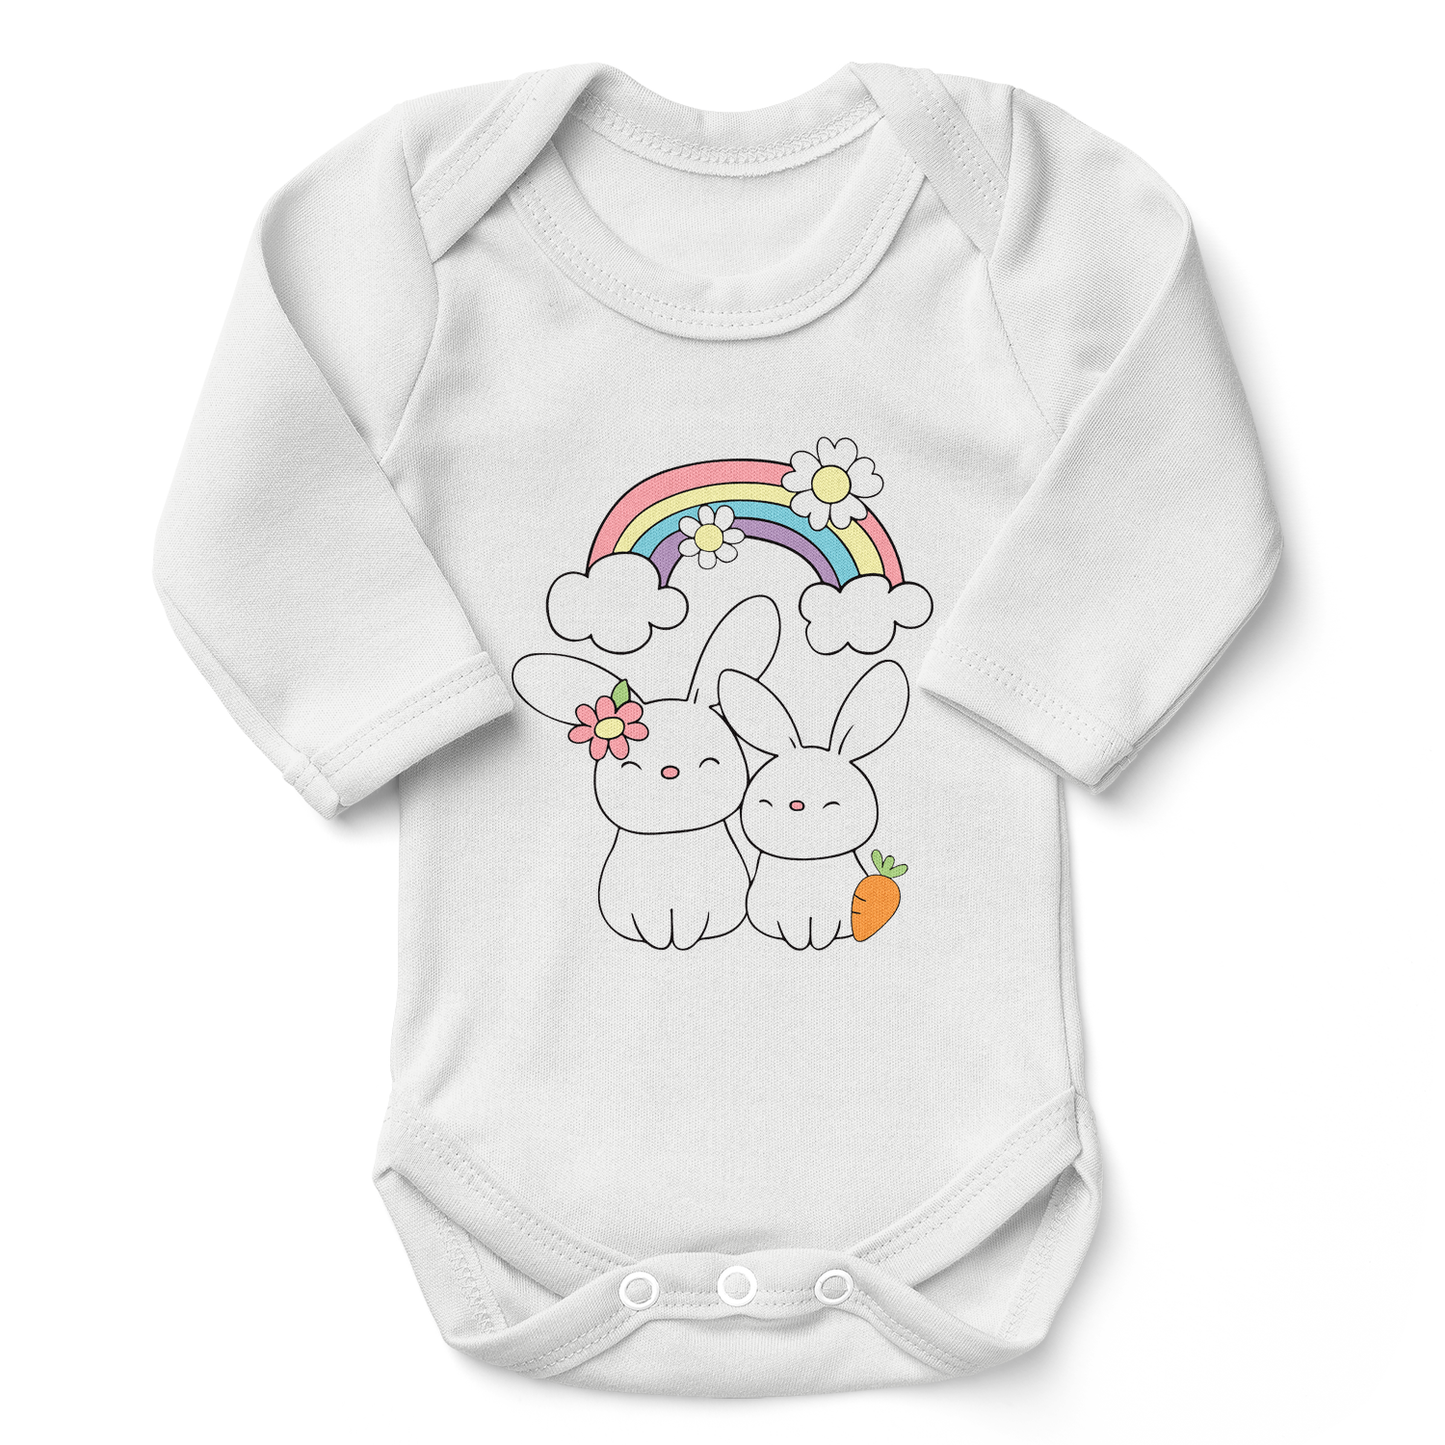 Endanzoo Matching Mom & Baby Organic Outfits - Bunny Love (White)